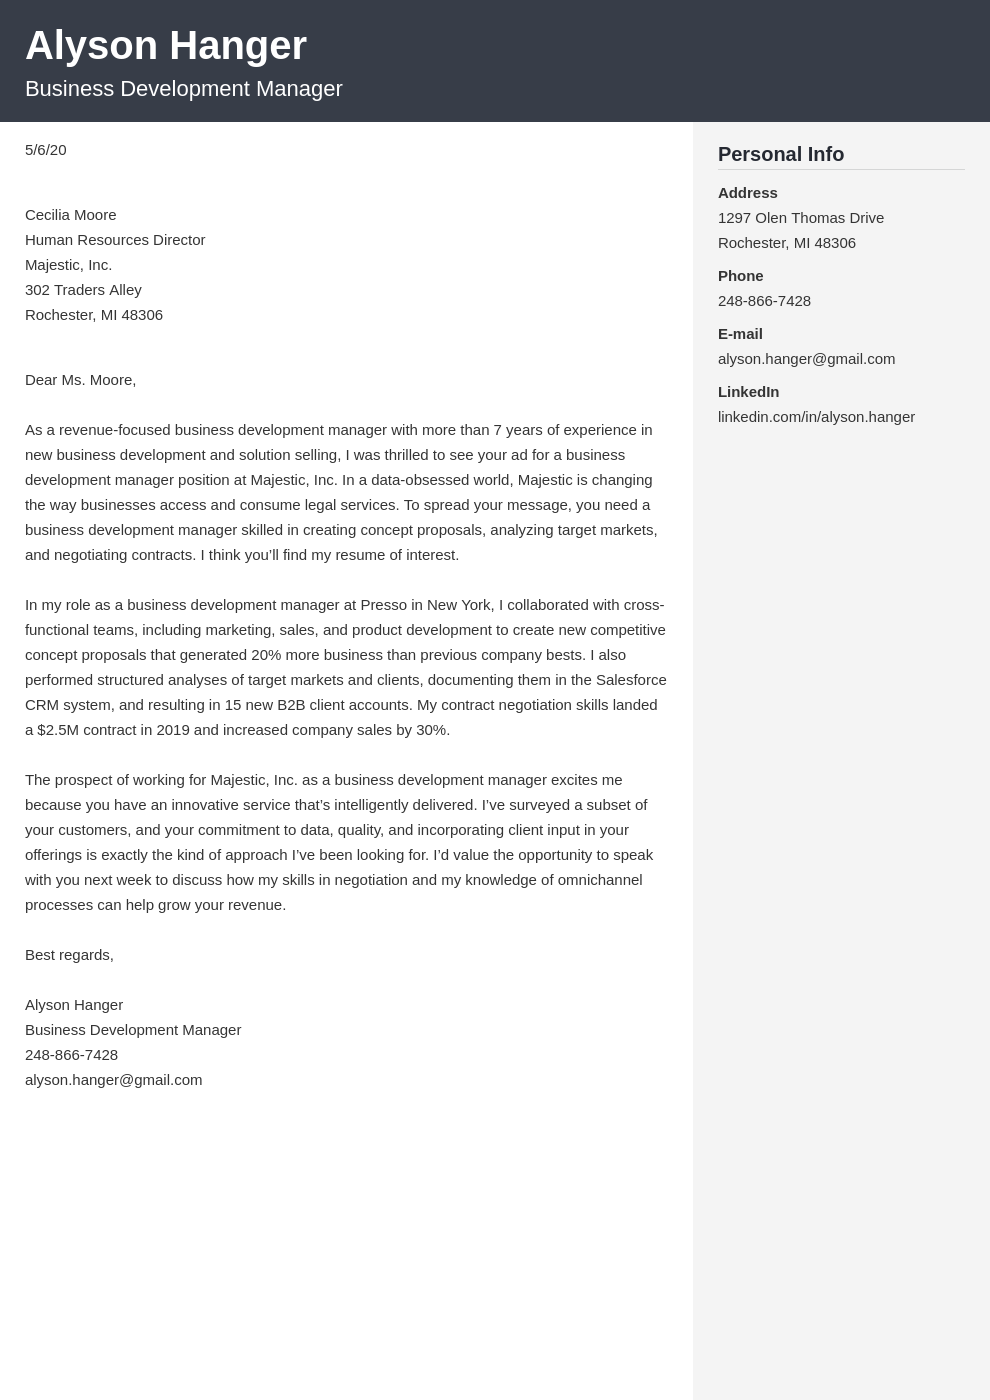 examples of cover letter for business development